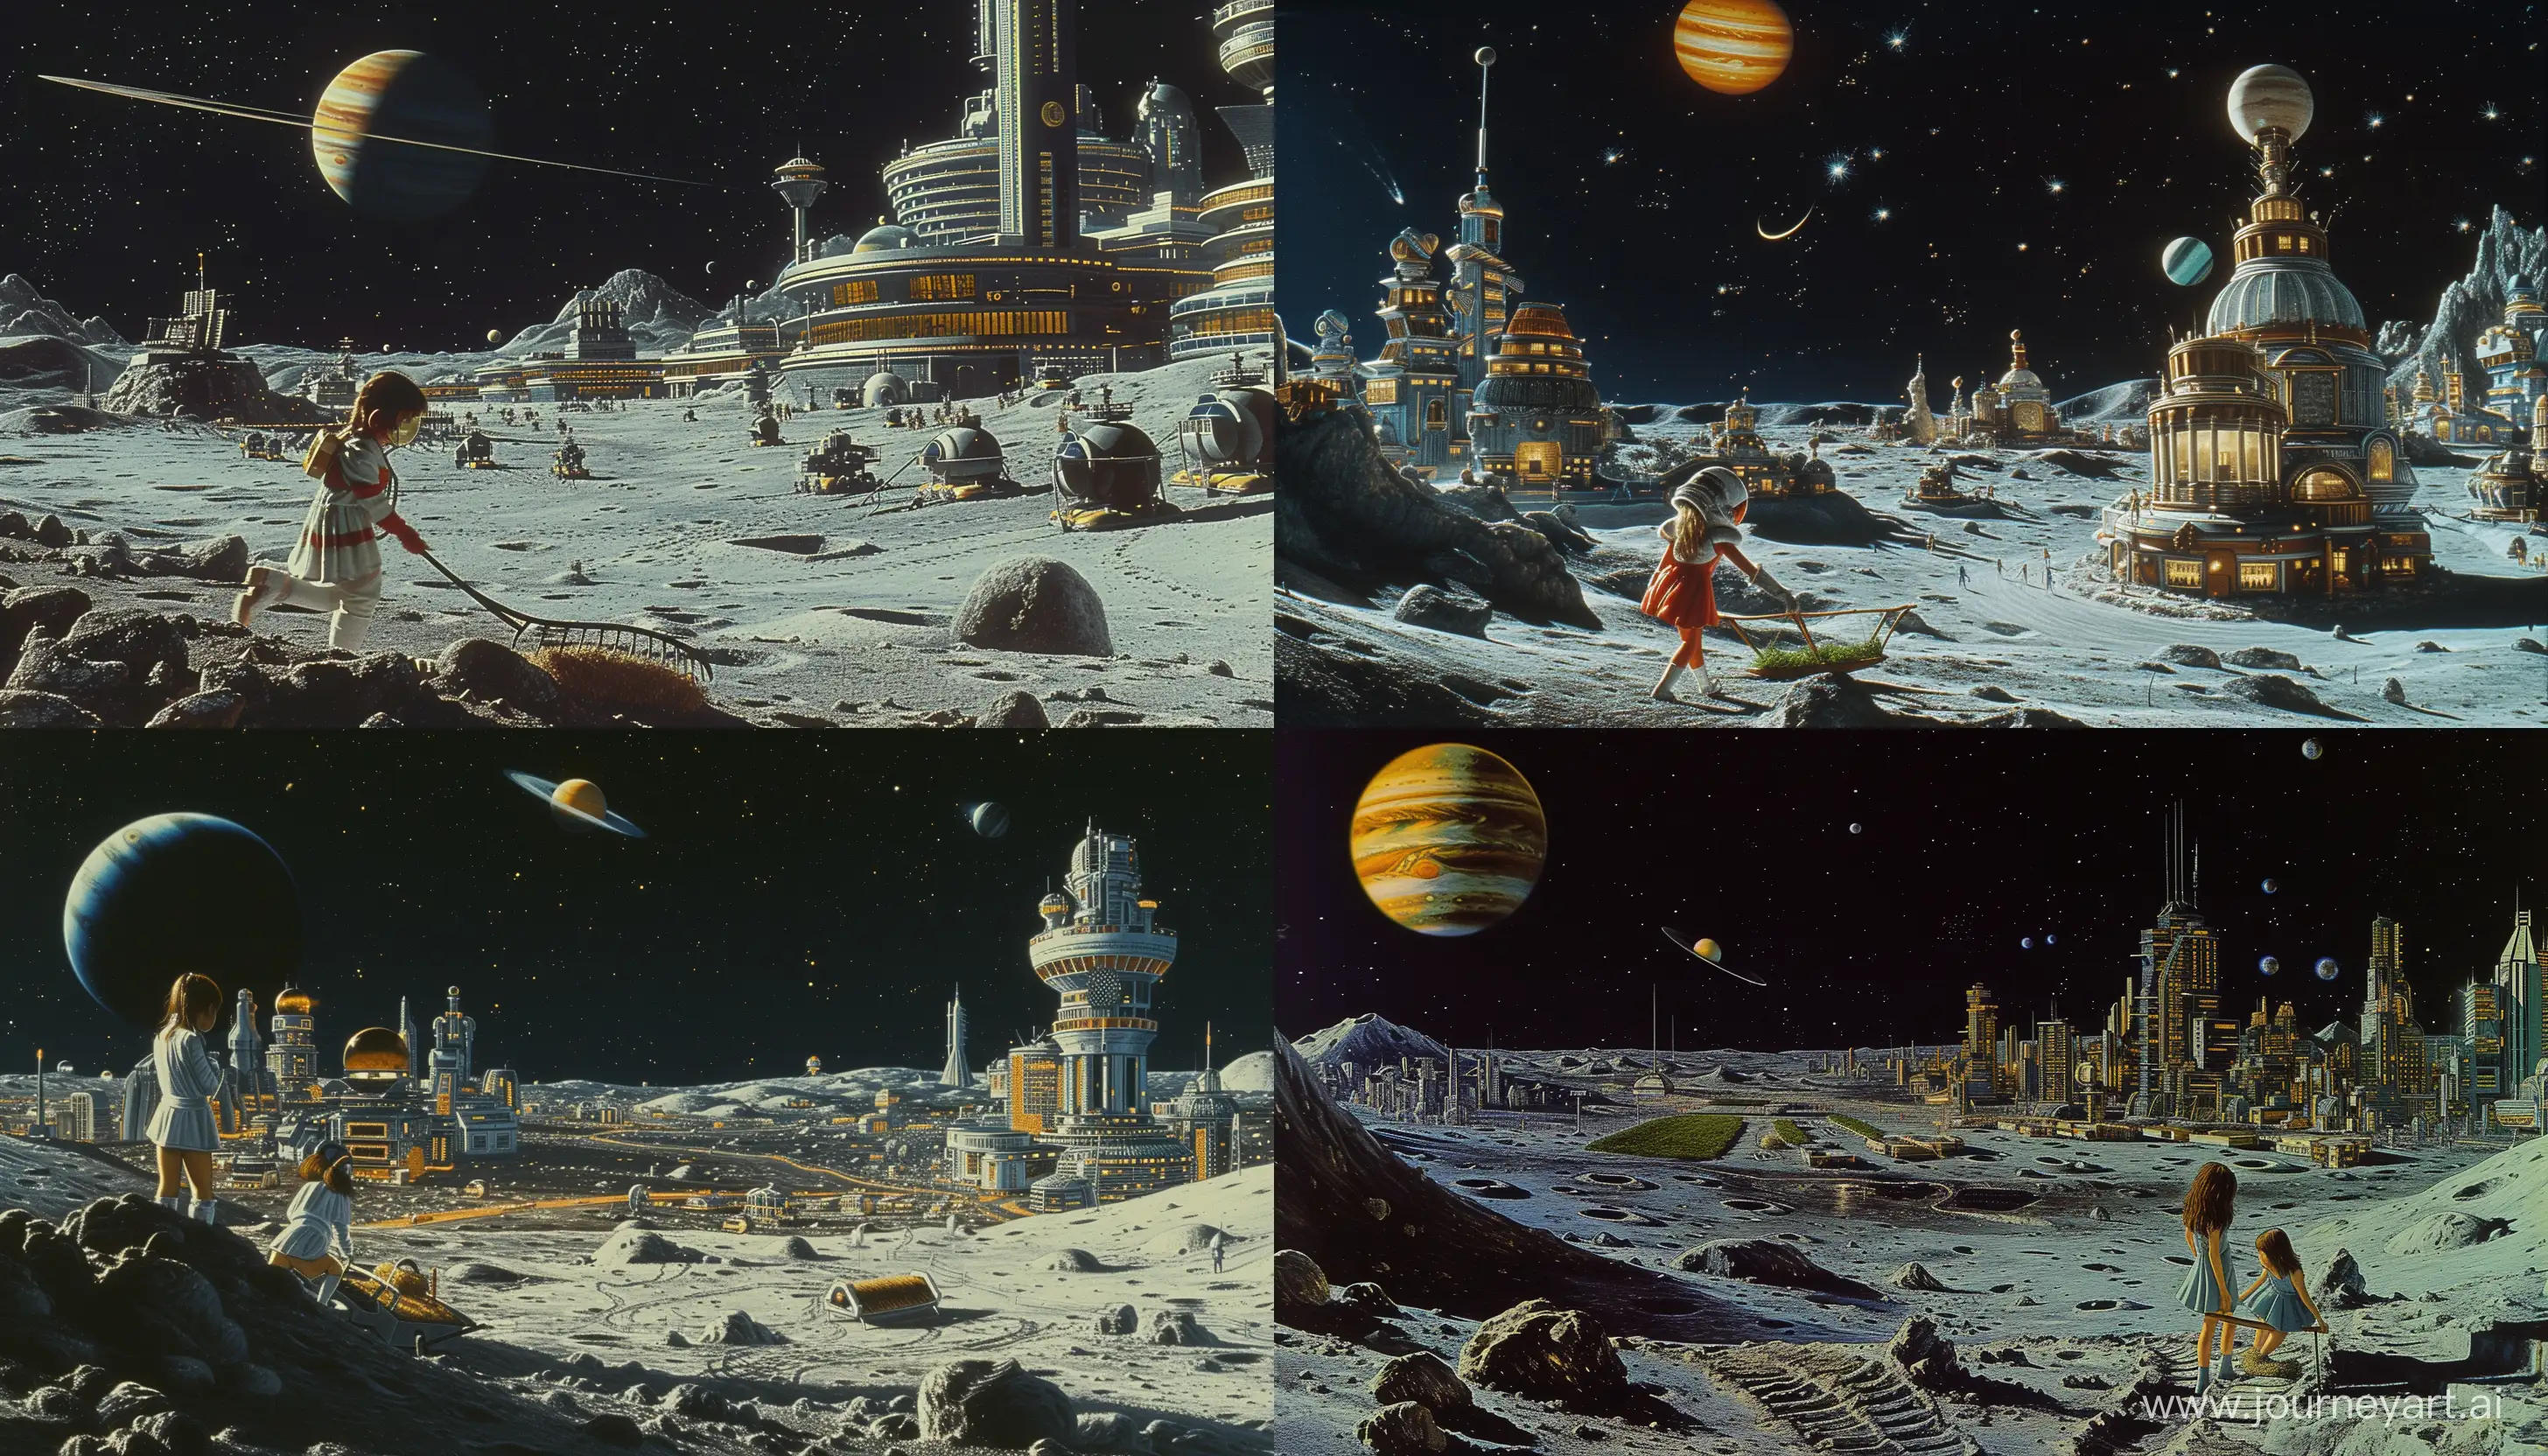 Futuristic-Moon-City-Farming-1980s-Style-with-Jupiter-in-the-Sky